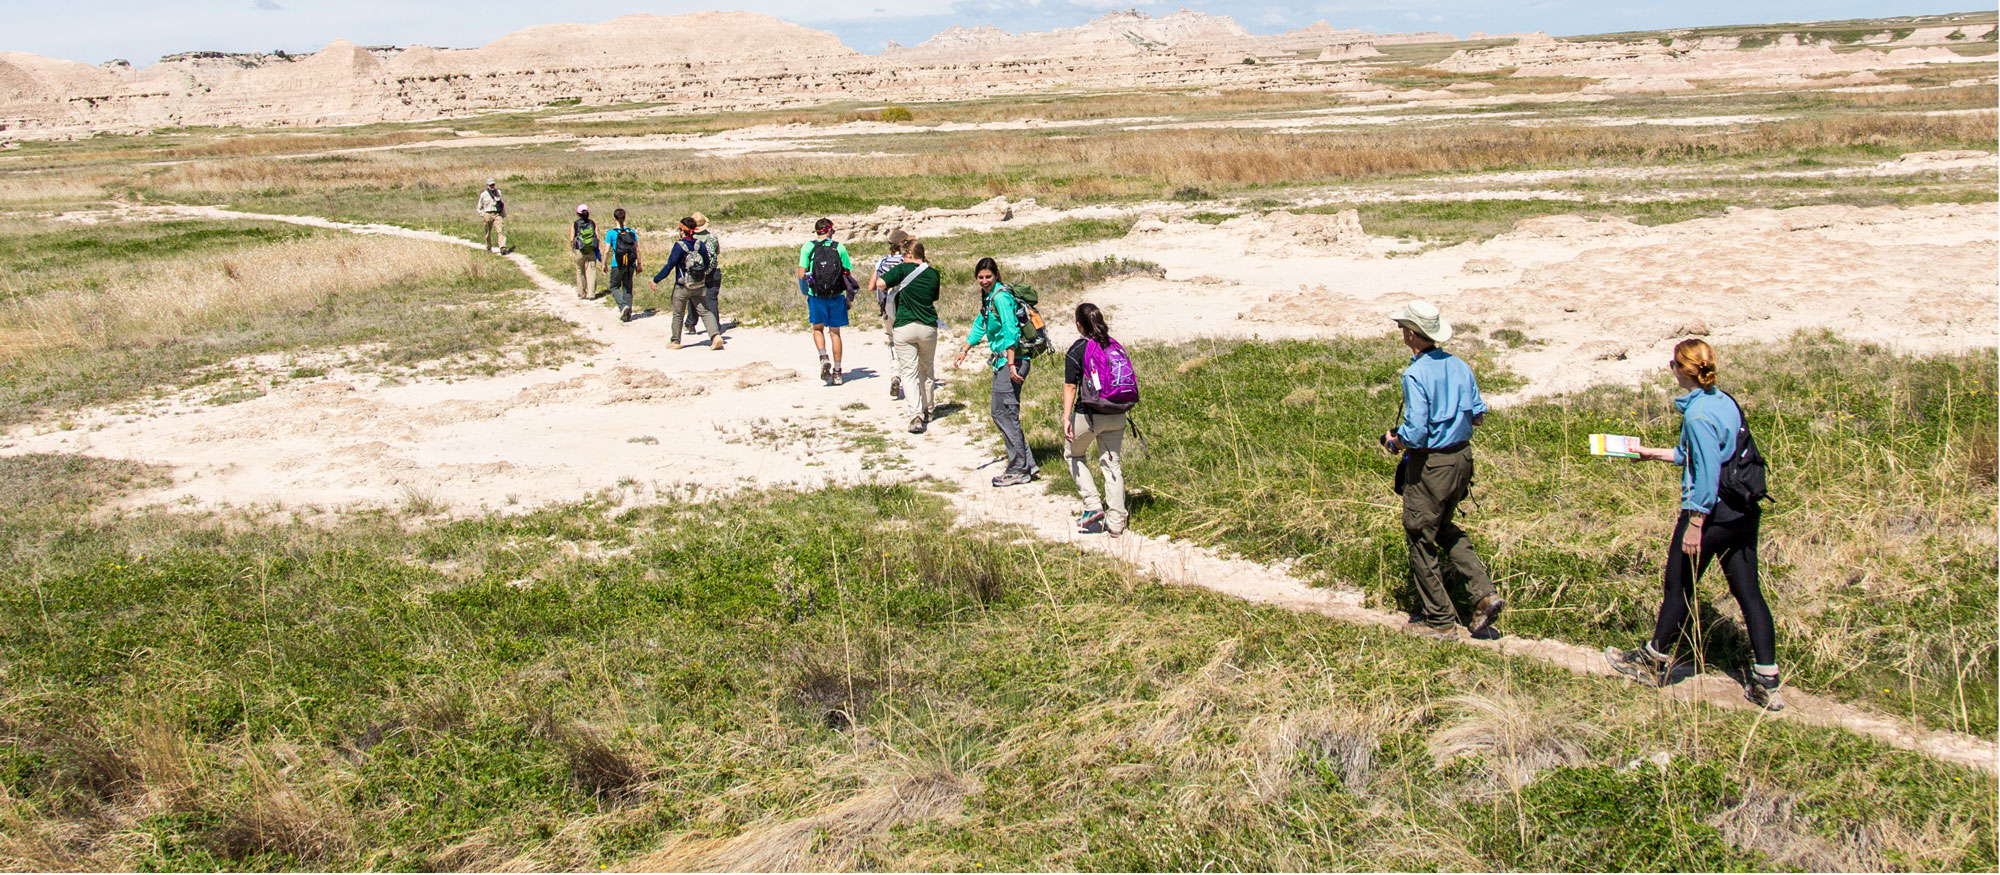 Students walking through the desert during a May X